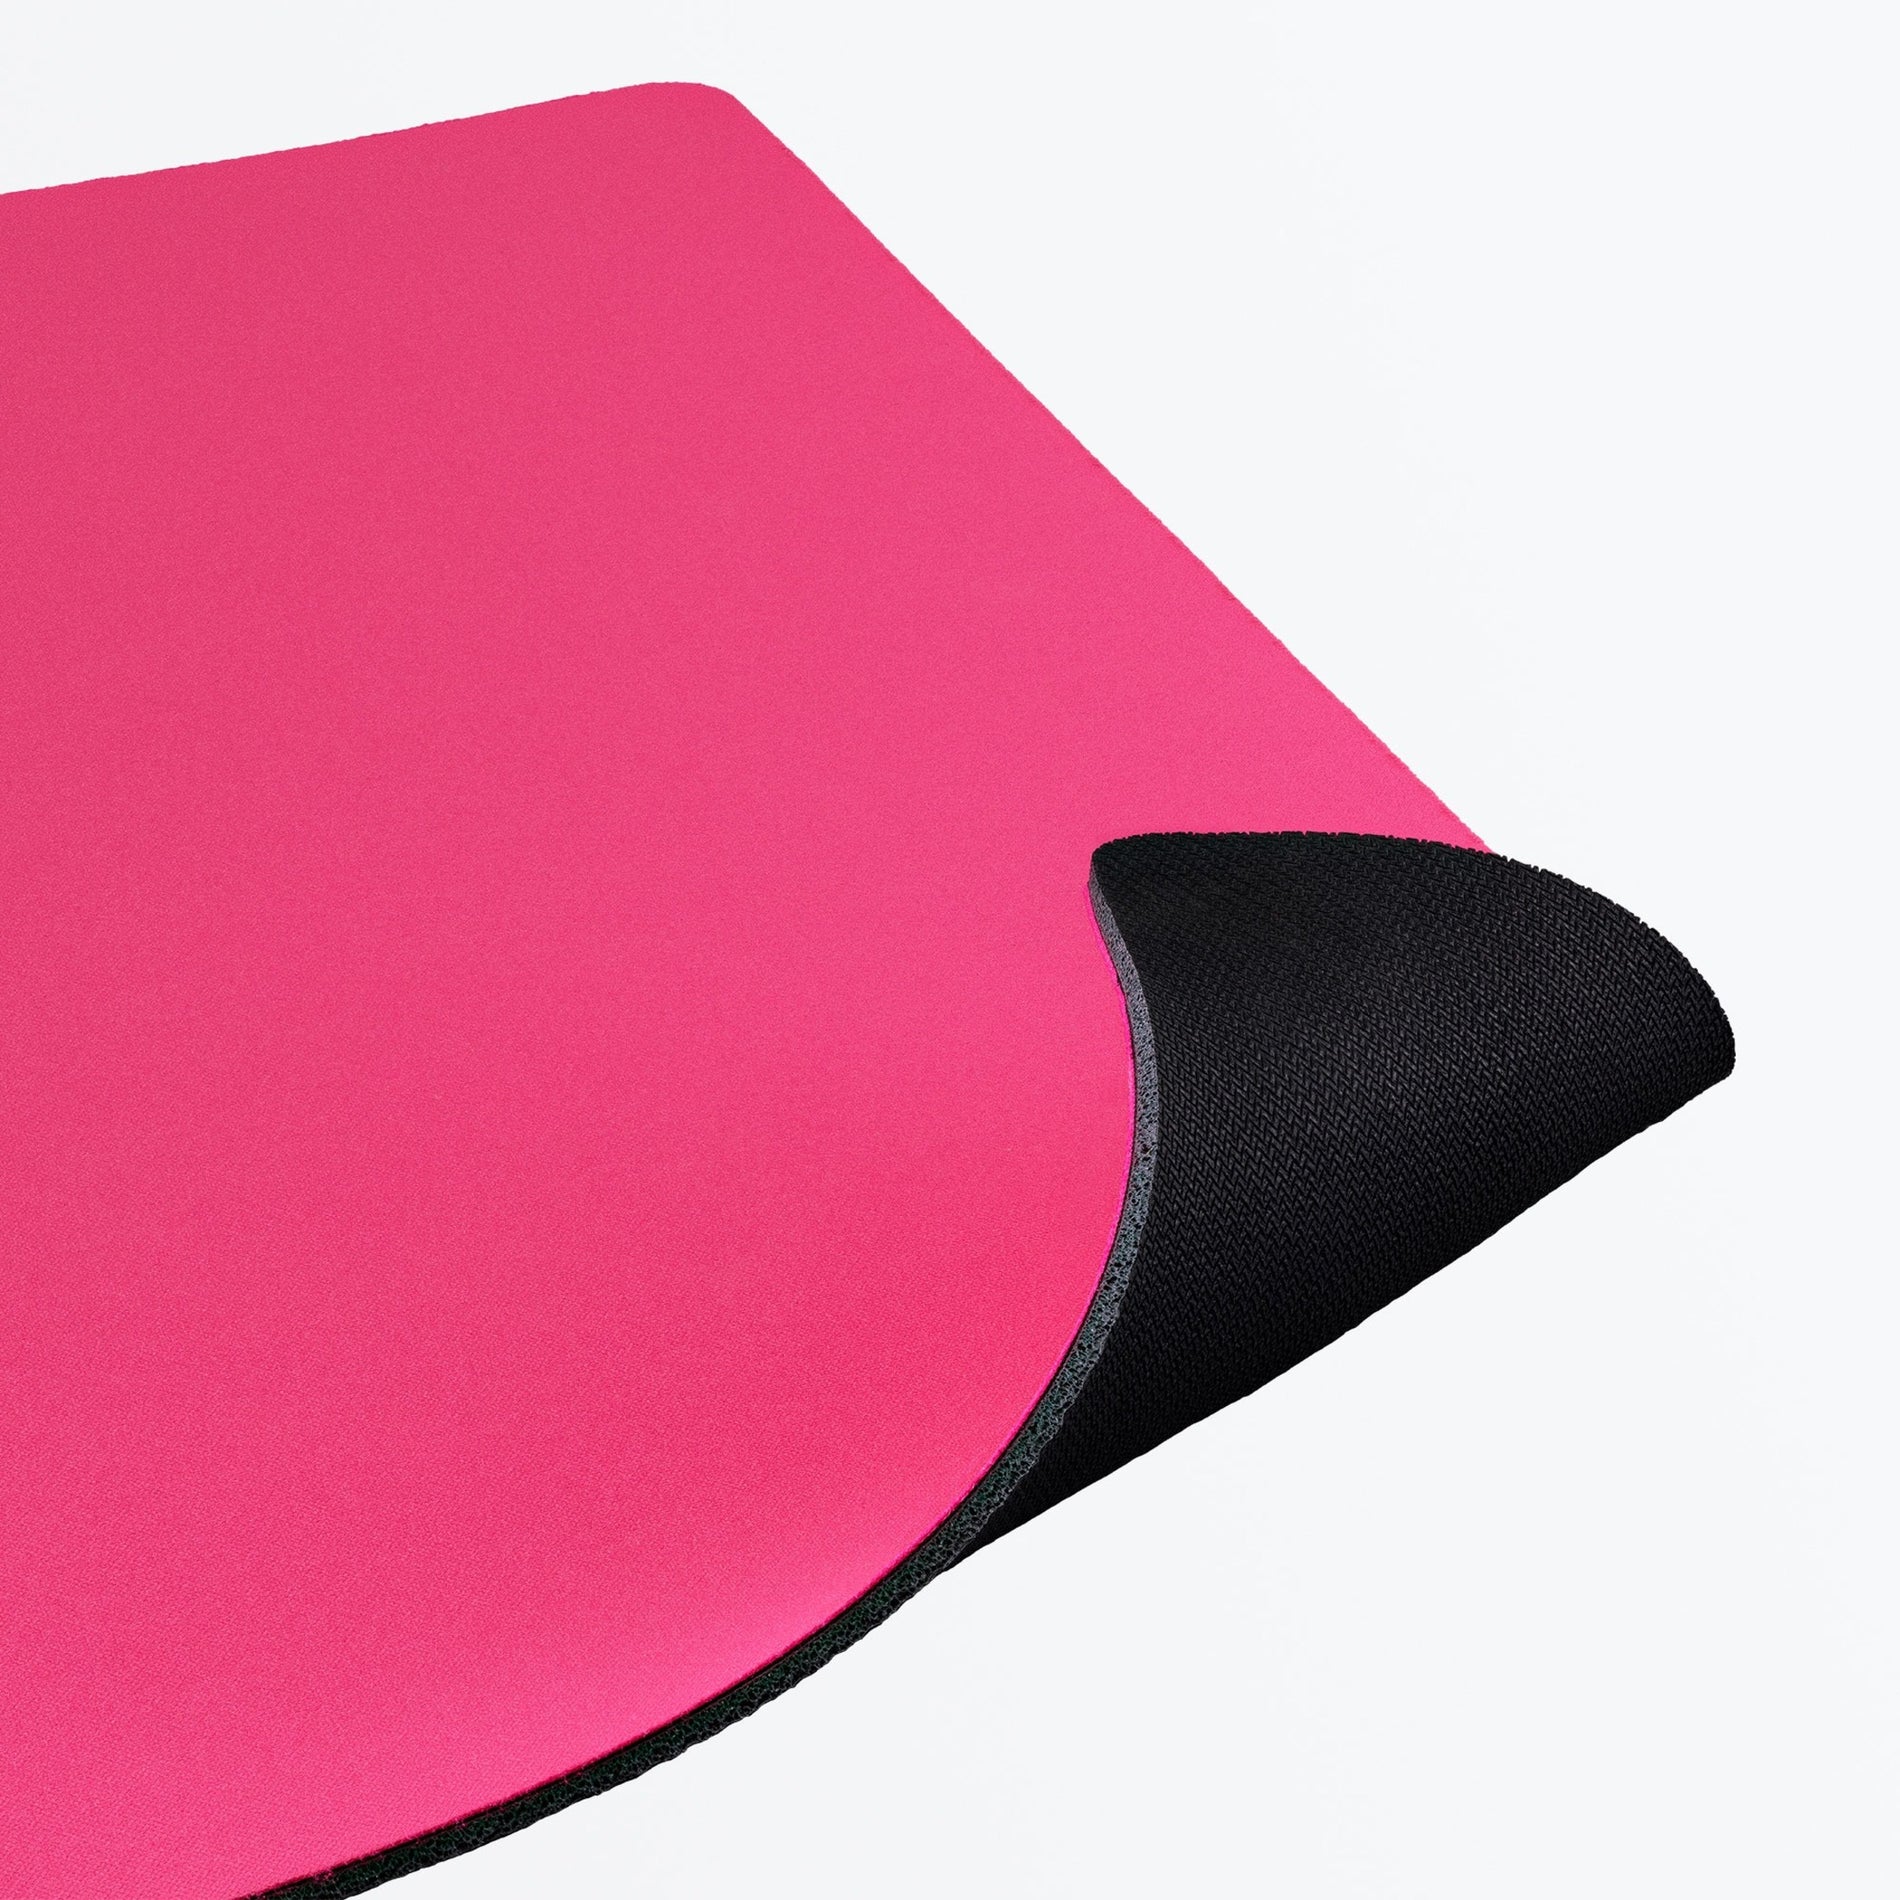 Logitech G 943-000712 G840 XL Gaming Mouse Pad, Extra Large Size, Surface Texture, Pink